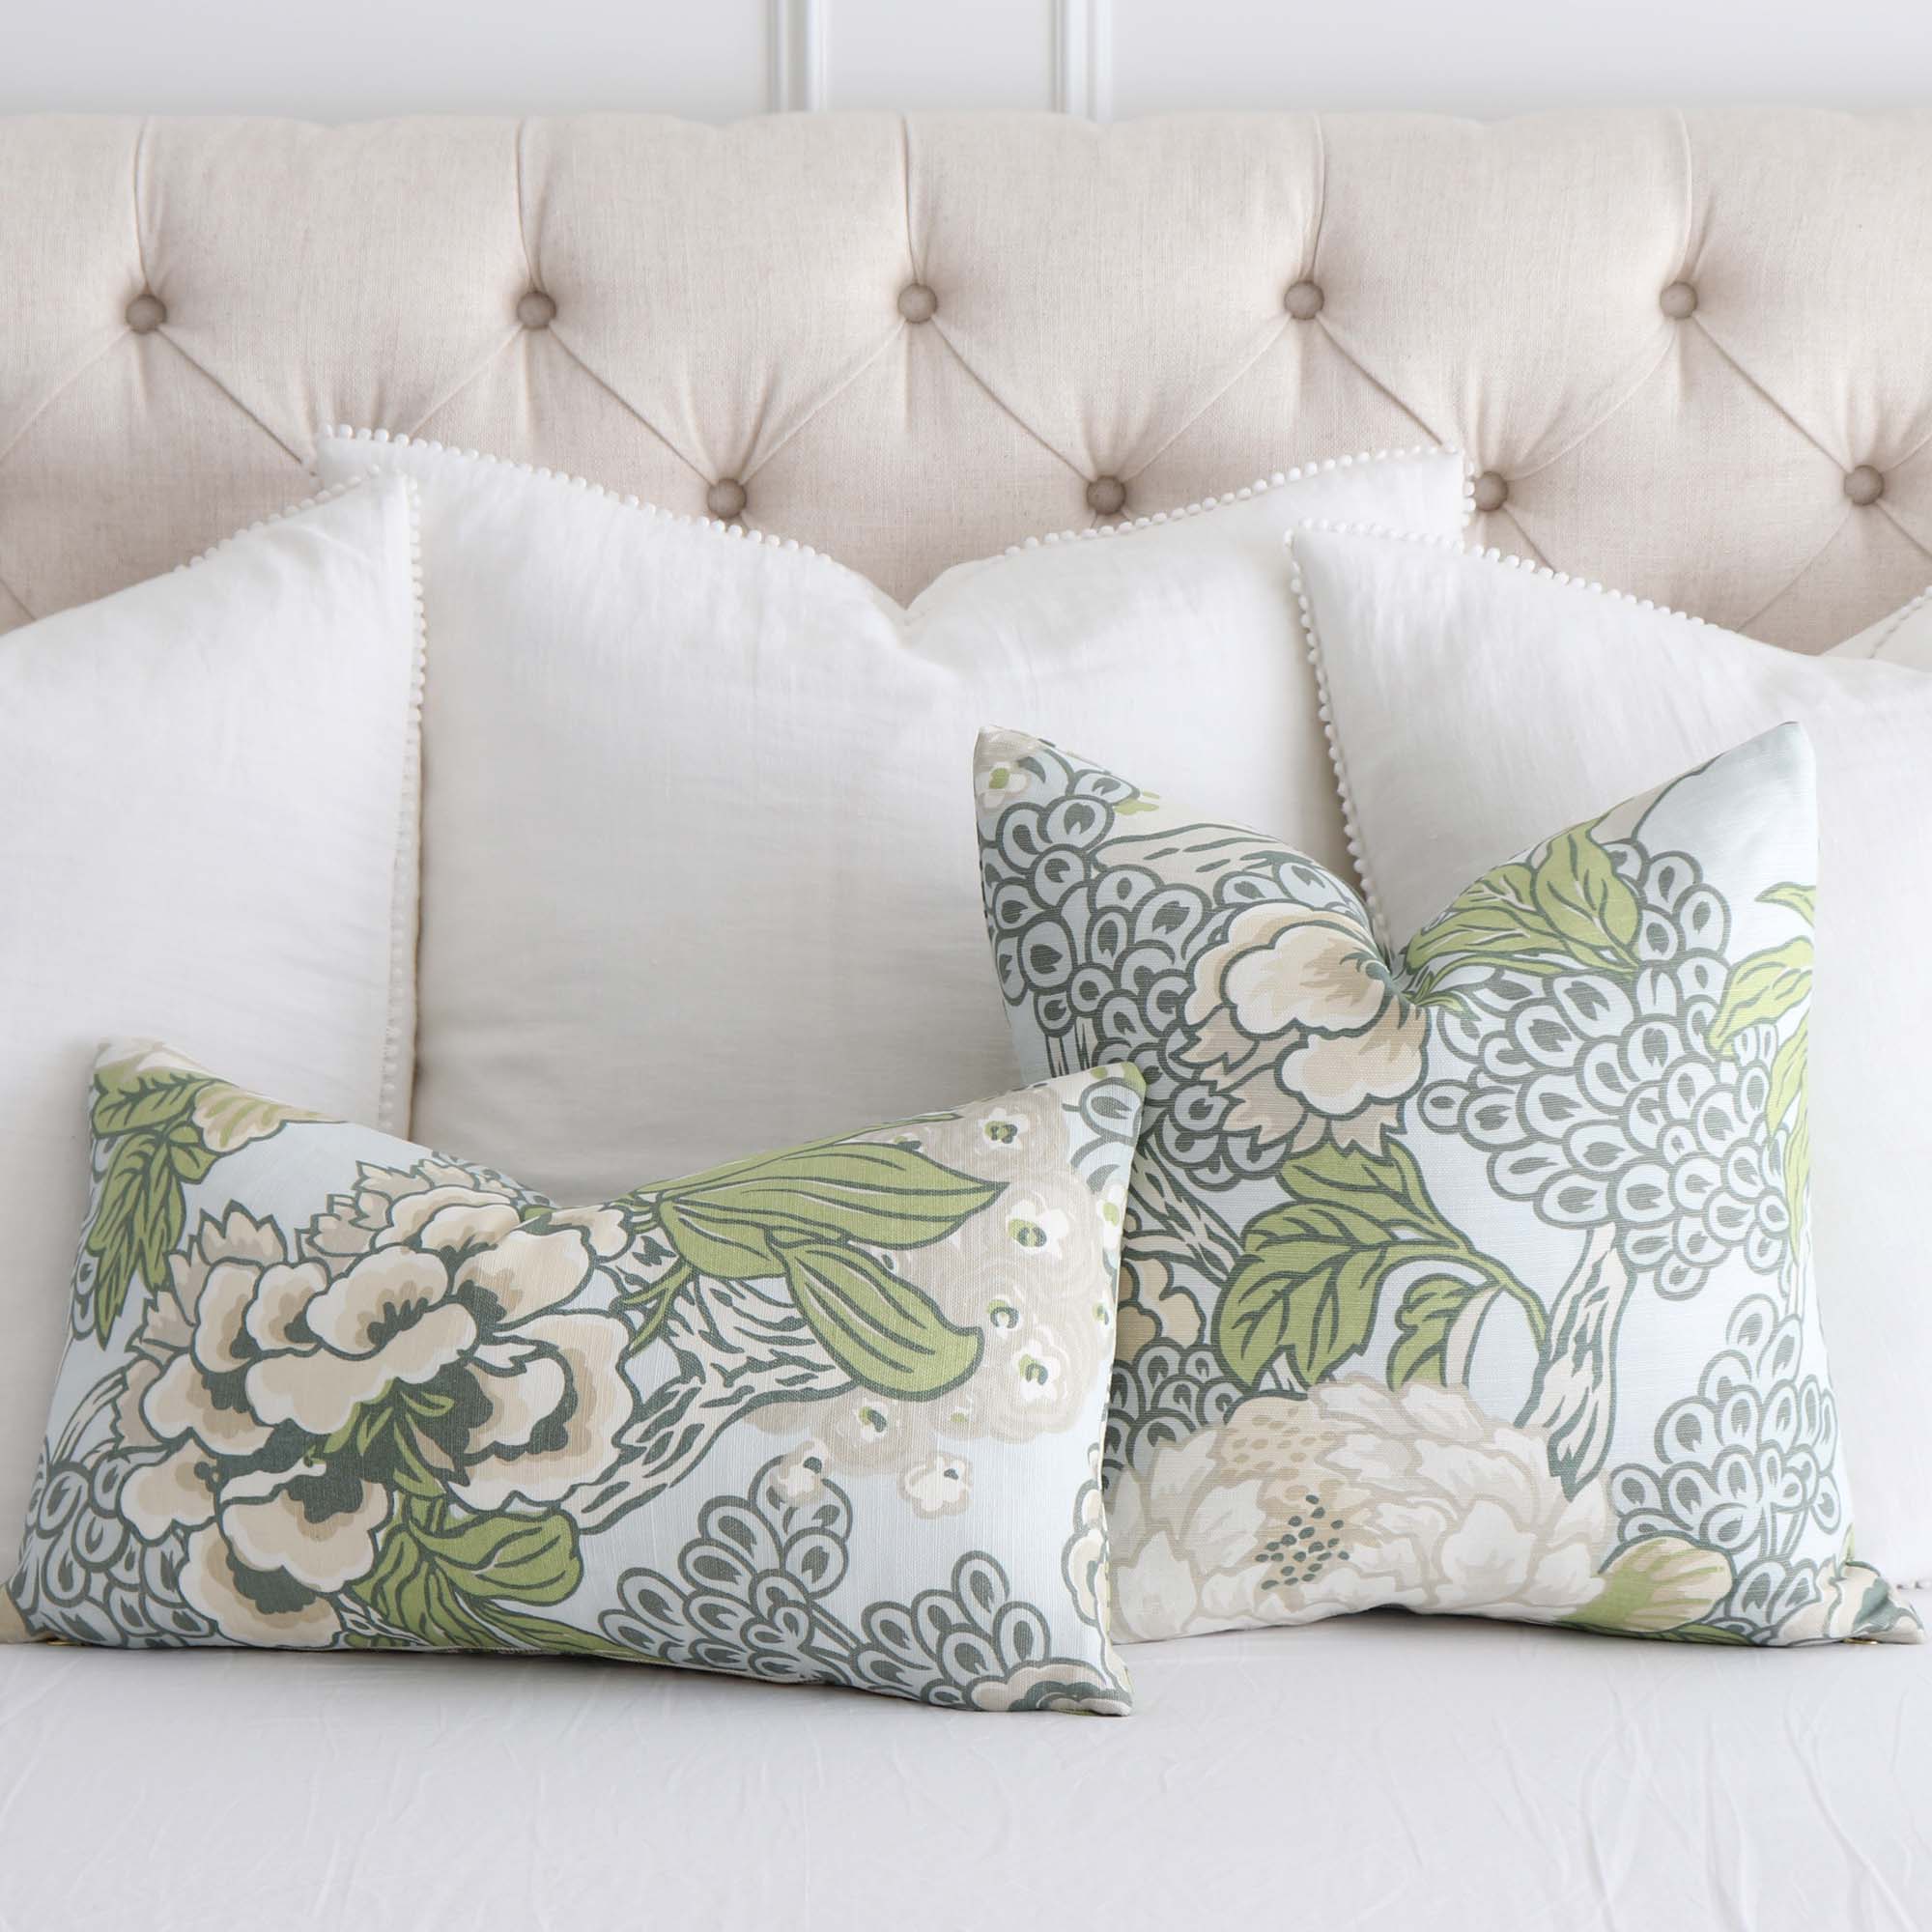 How to Re-fluff Your Throw Pillows • Robyn's Southern Nest